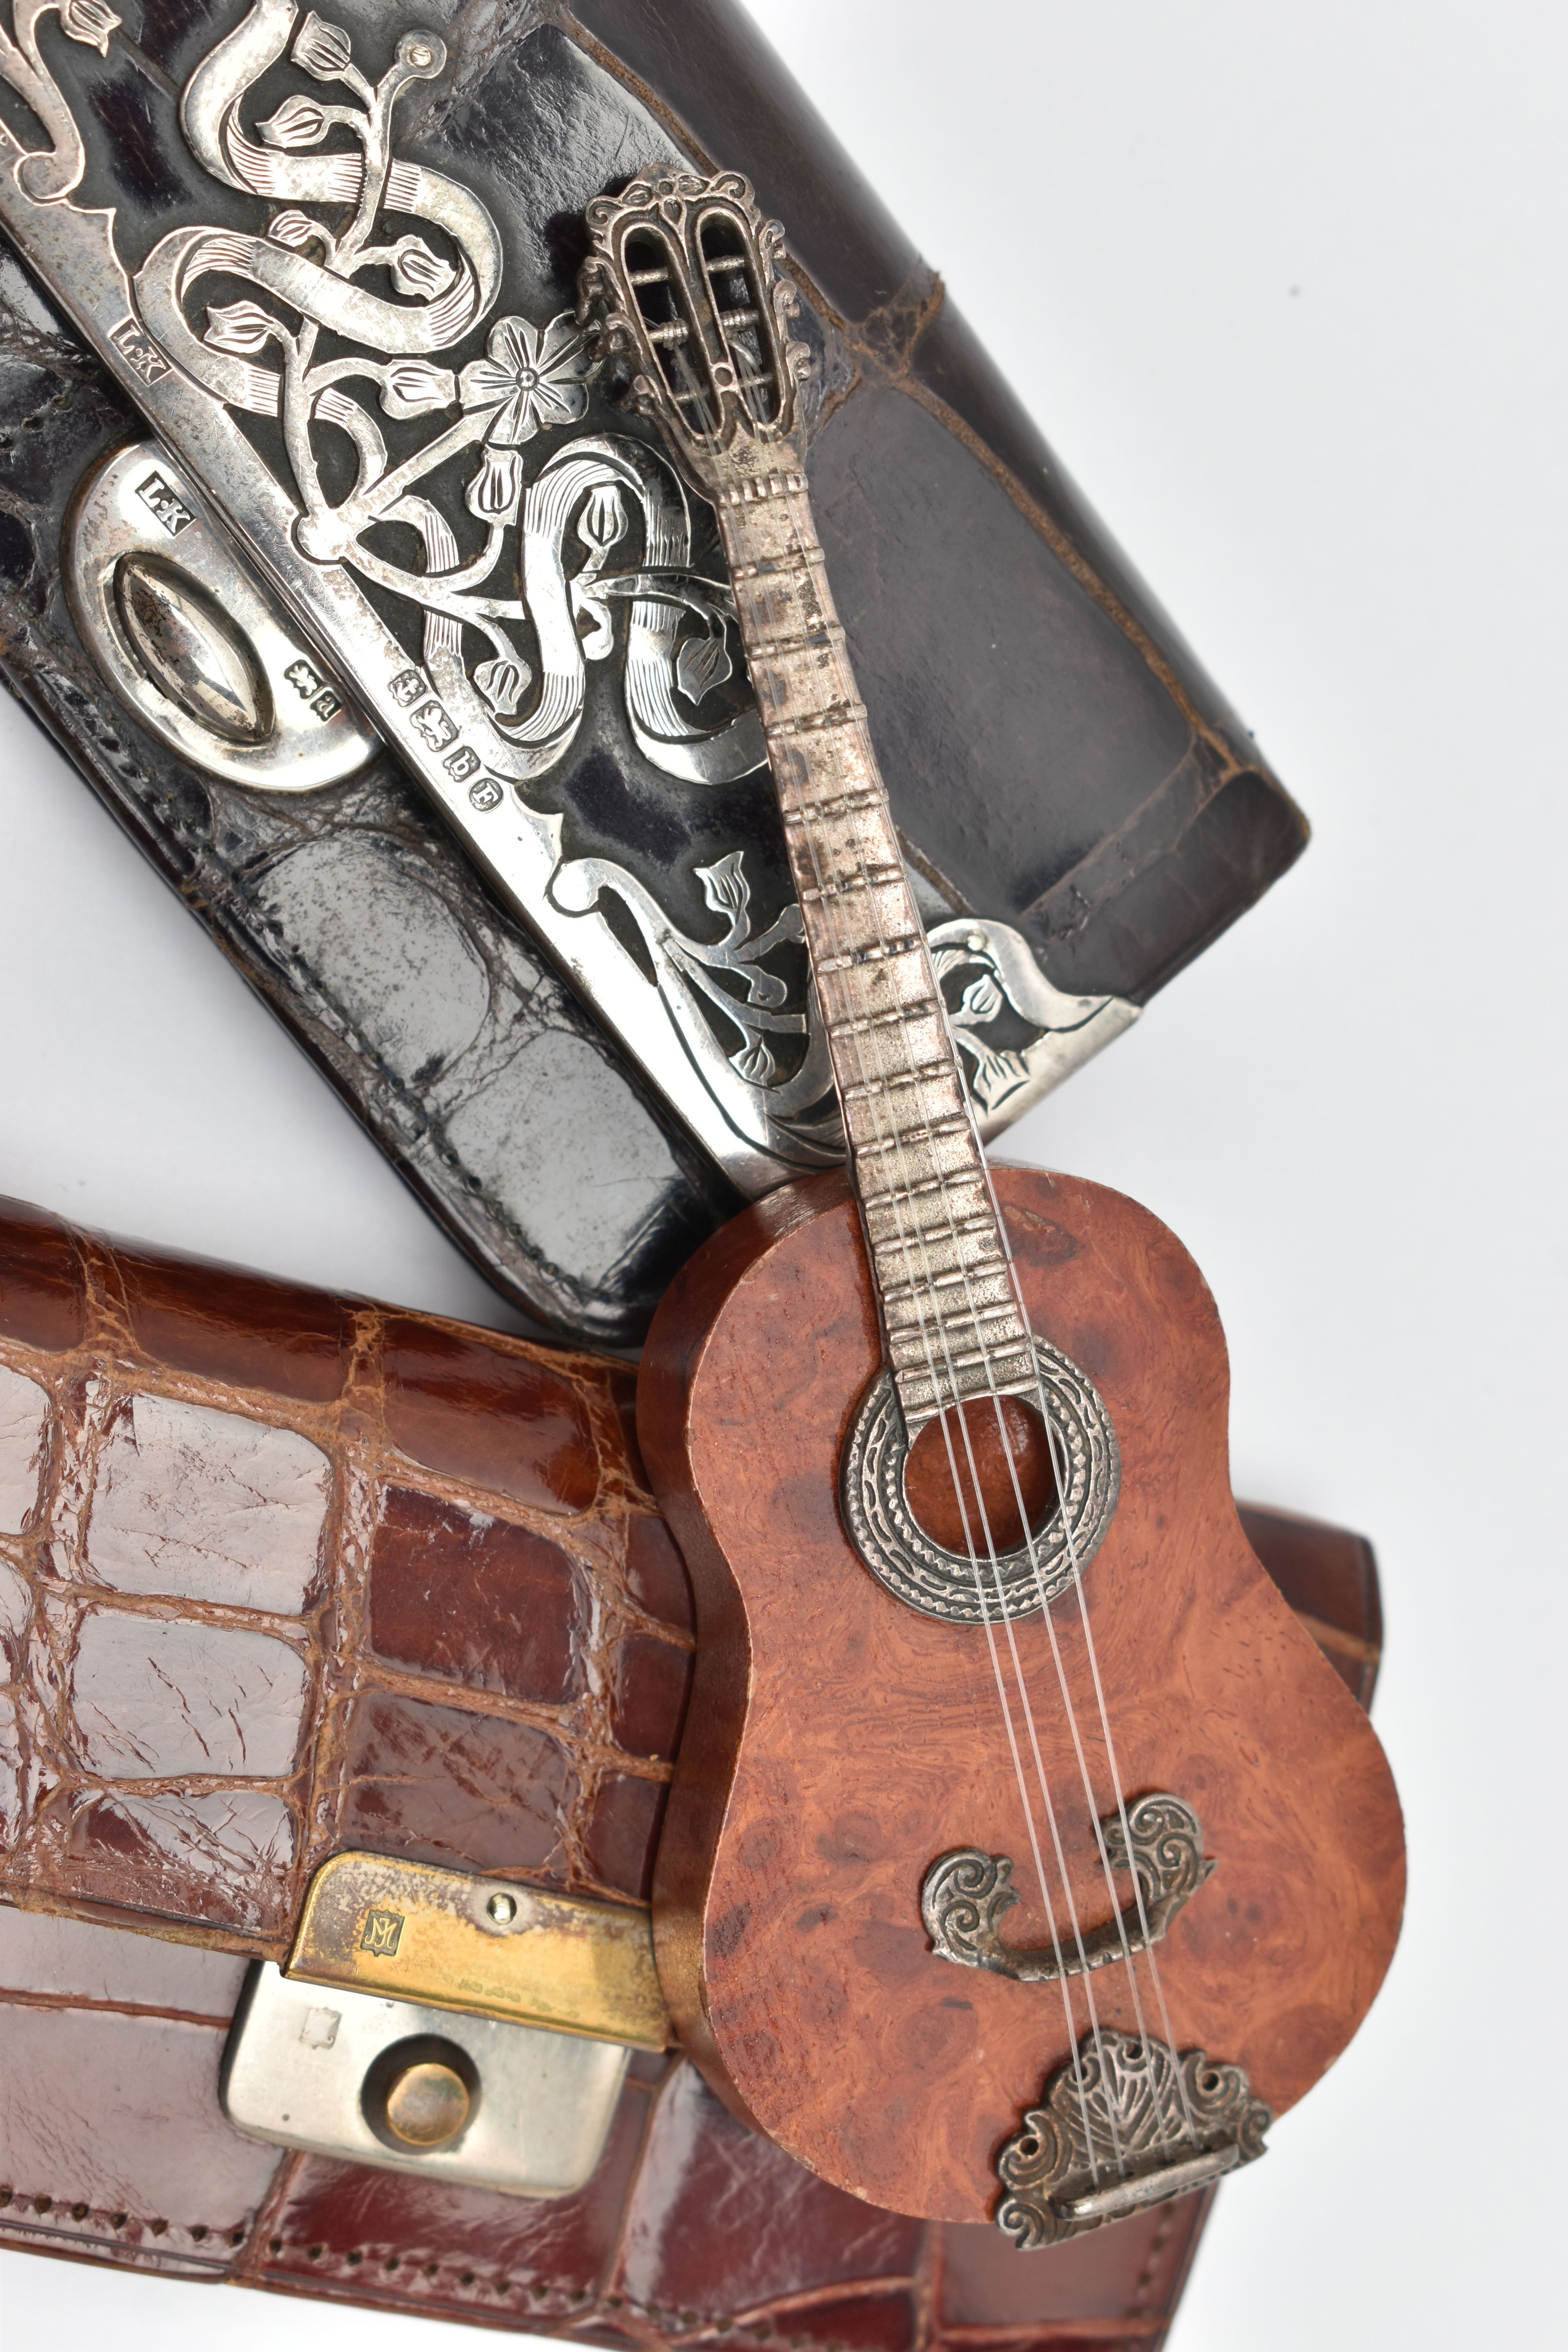 TWO SILVER MOUNTED PURSES AND A MINITURE GUITAR, the first a black croc purse with floral silver - Image 5 of 6